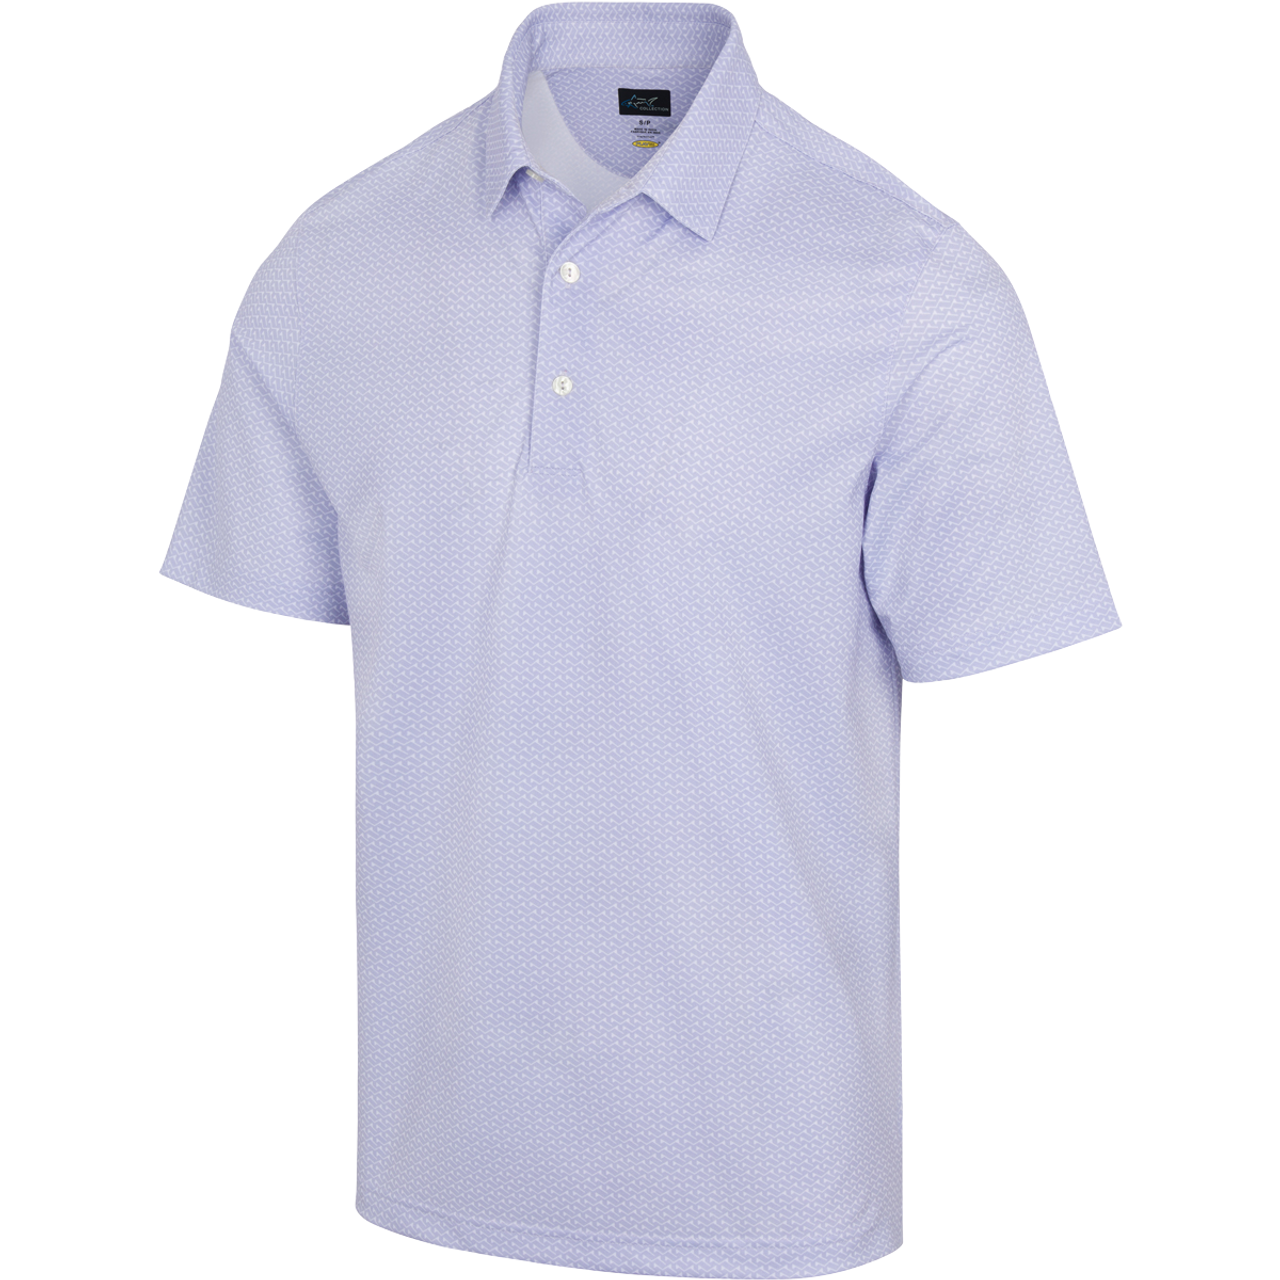 New Greg Norman ML75 Microlux Whale Tail Print Shirt Apparel at